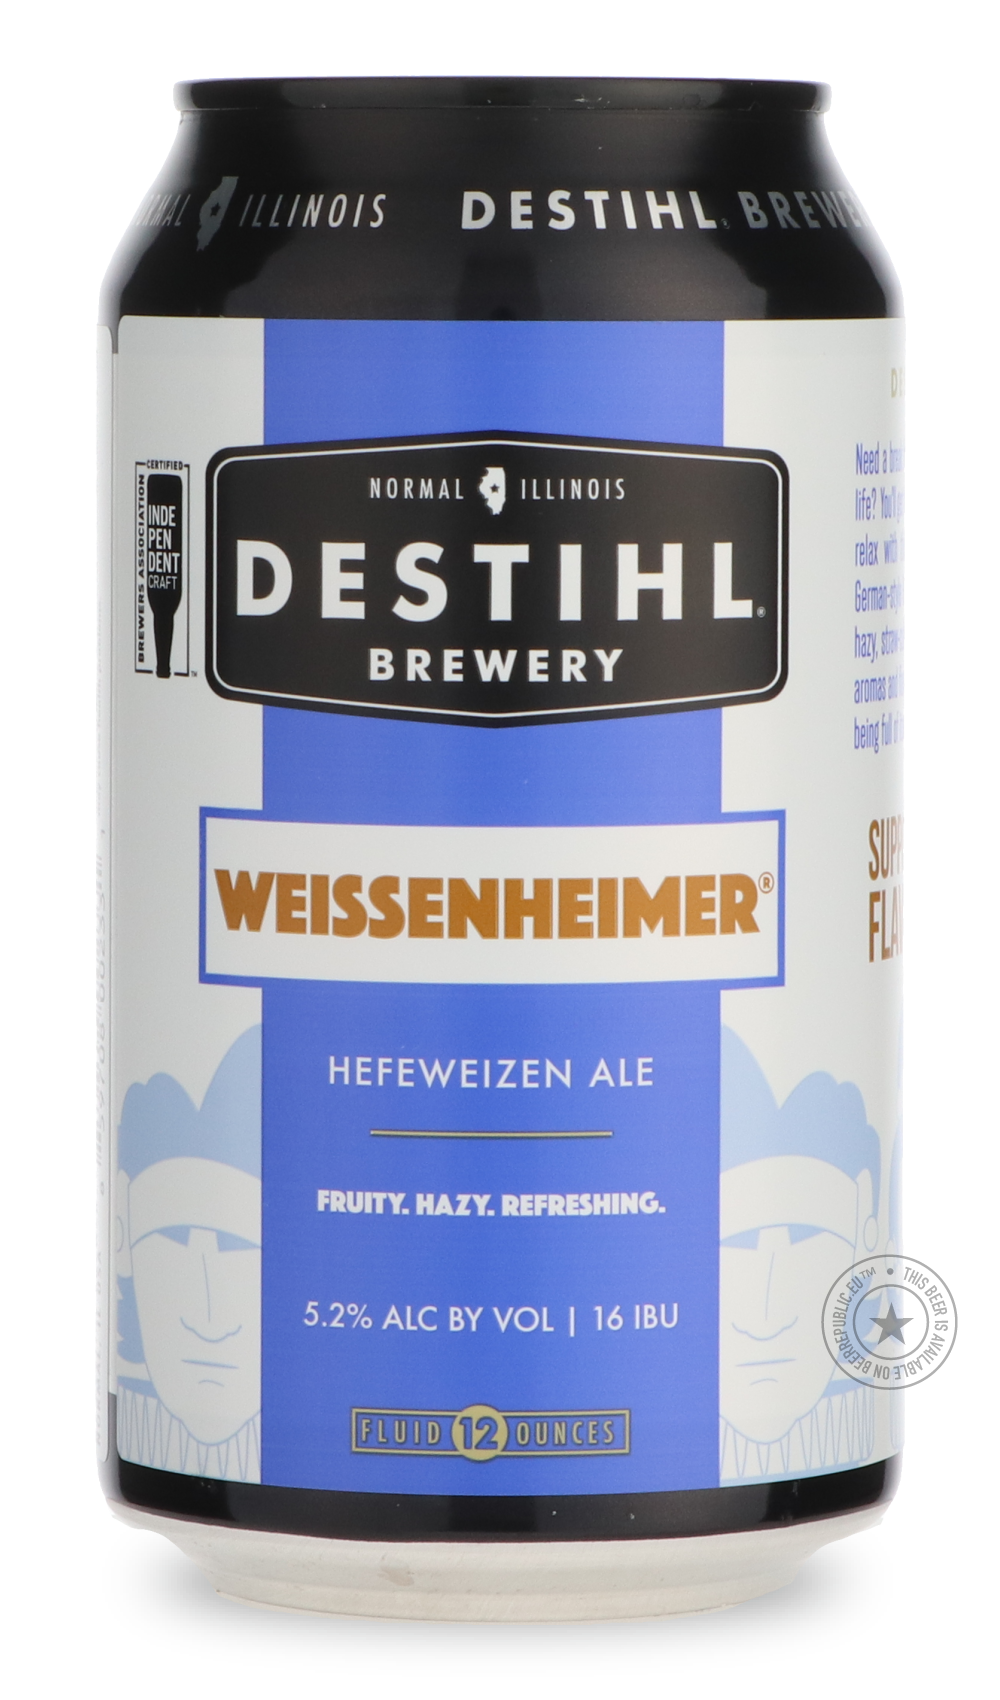 -Destihl- Weissenheimer-Pale- Only @ Beer Republic - The best online beer store for American & Canadian craft beer - Buy beer online from the USA and Canada - Bier online kopen - Amerikaans bier kopen - Craft beer store - Craft beer kopen - Amerikanisch bier kaufen - Bier online kaufen - Acheter biere online - IPA - Stout - Porter - New England IPA - Hazy IPA - Imperial Stout - Barrel Aged - Barrel Aged Imperial Stout - Brown - Dark beer - Blond - Blonde - Pilsner - Lager - Wheat - Weizen - Amber - Barley W